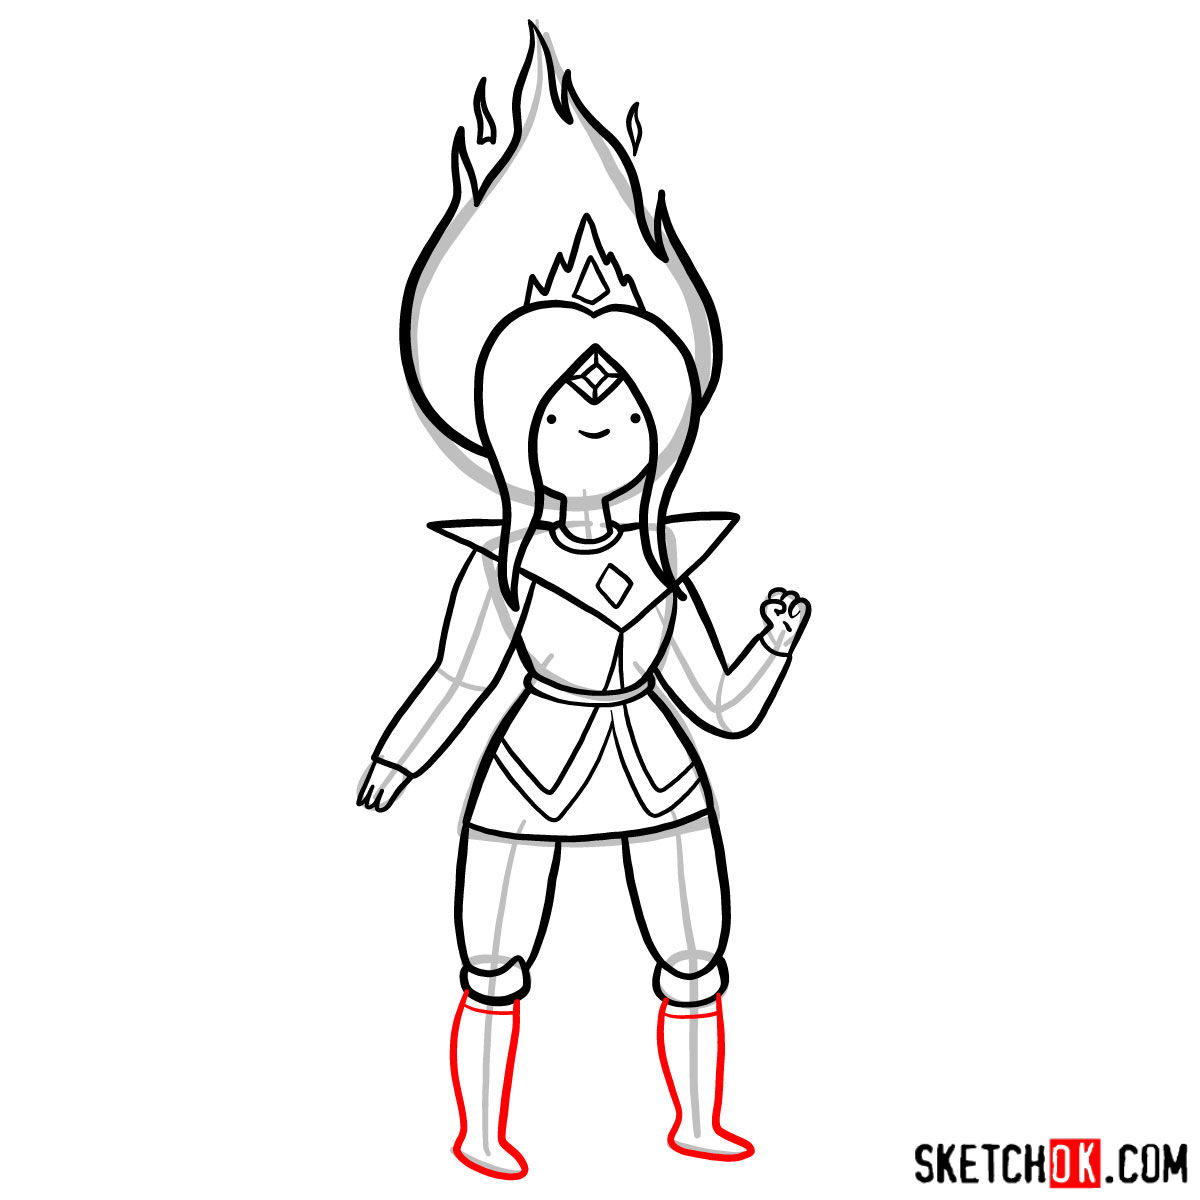 How to draw Flame Princess from Adventure Time - step 10